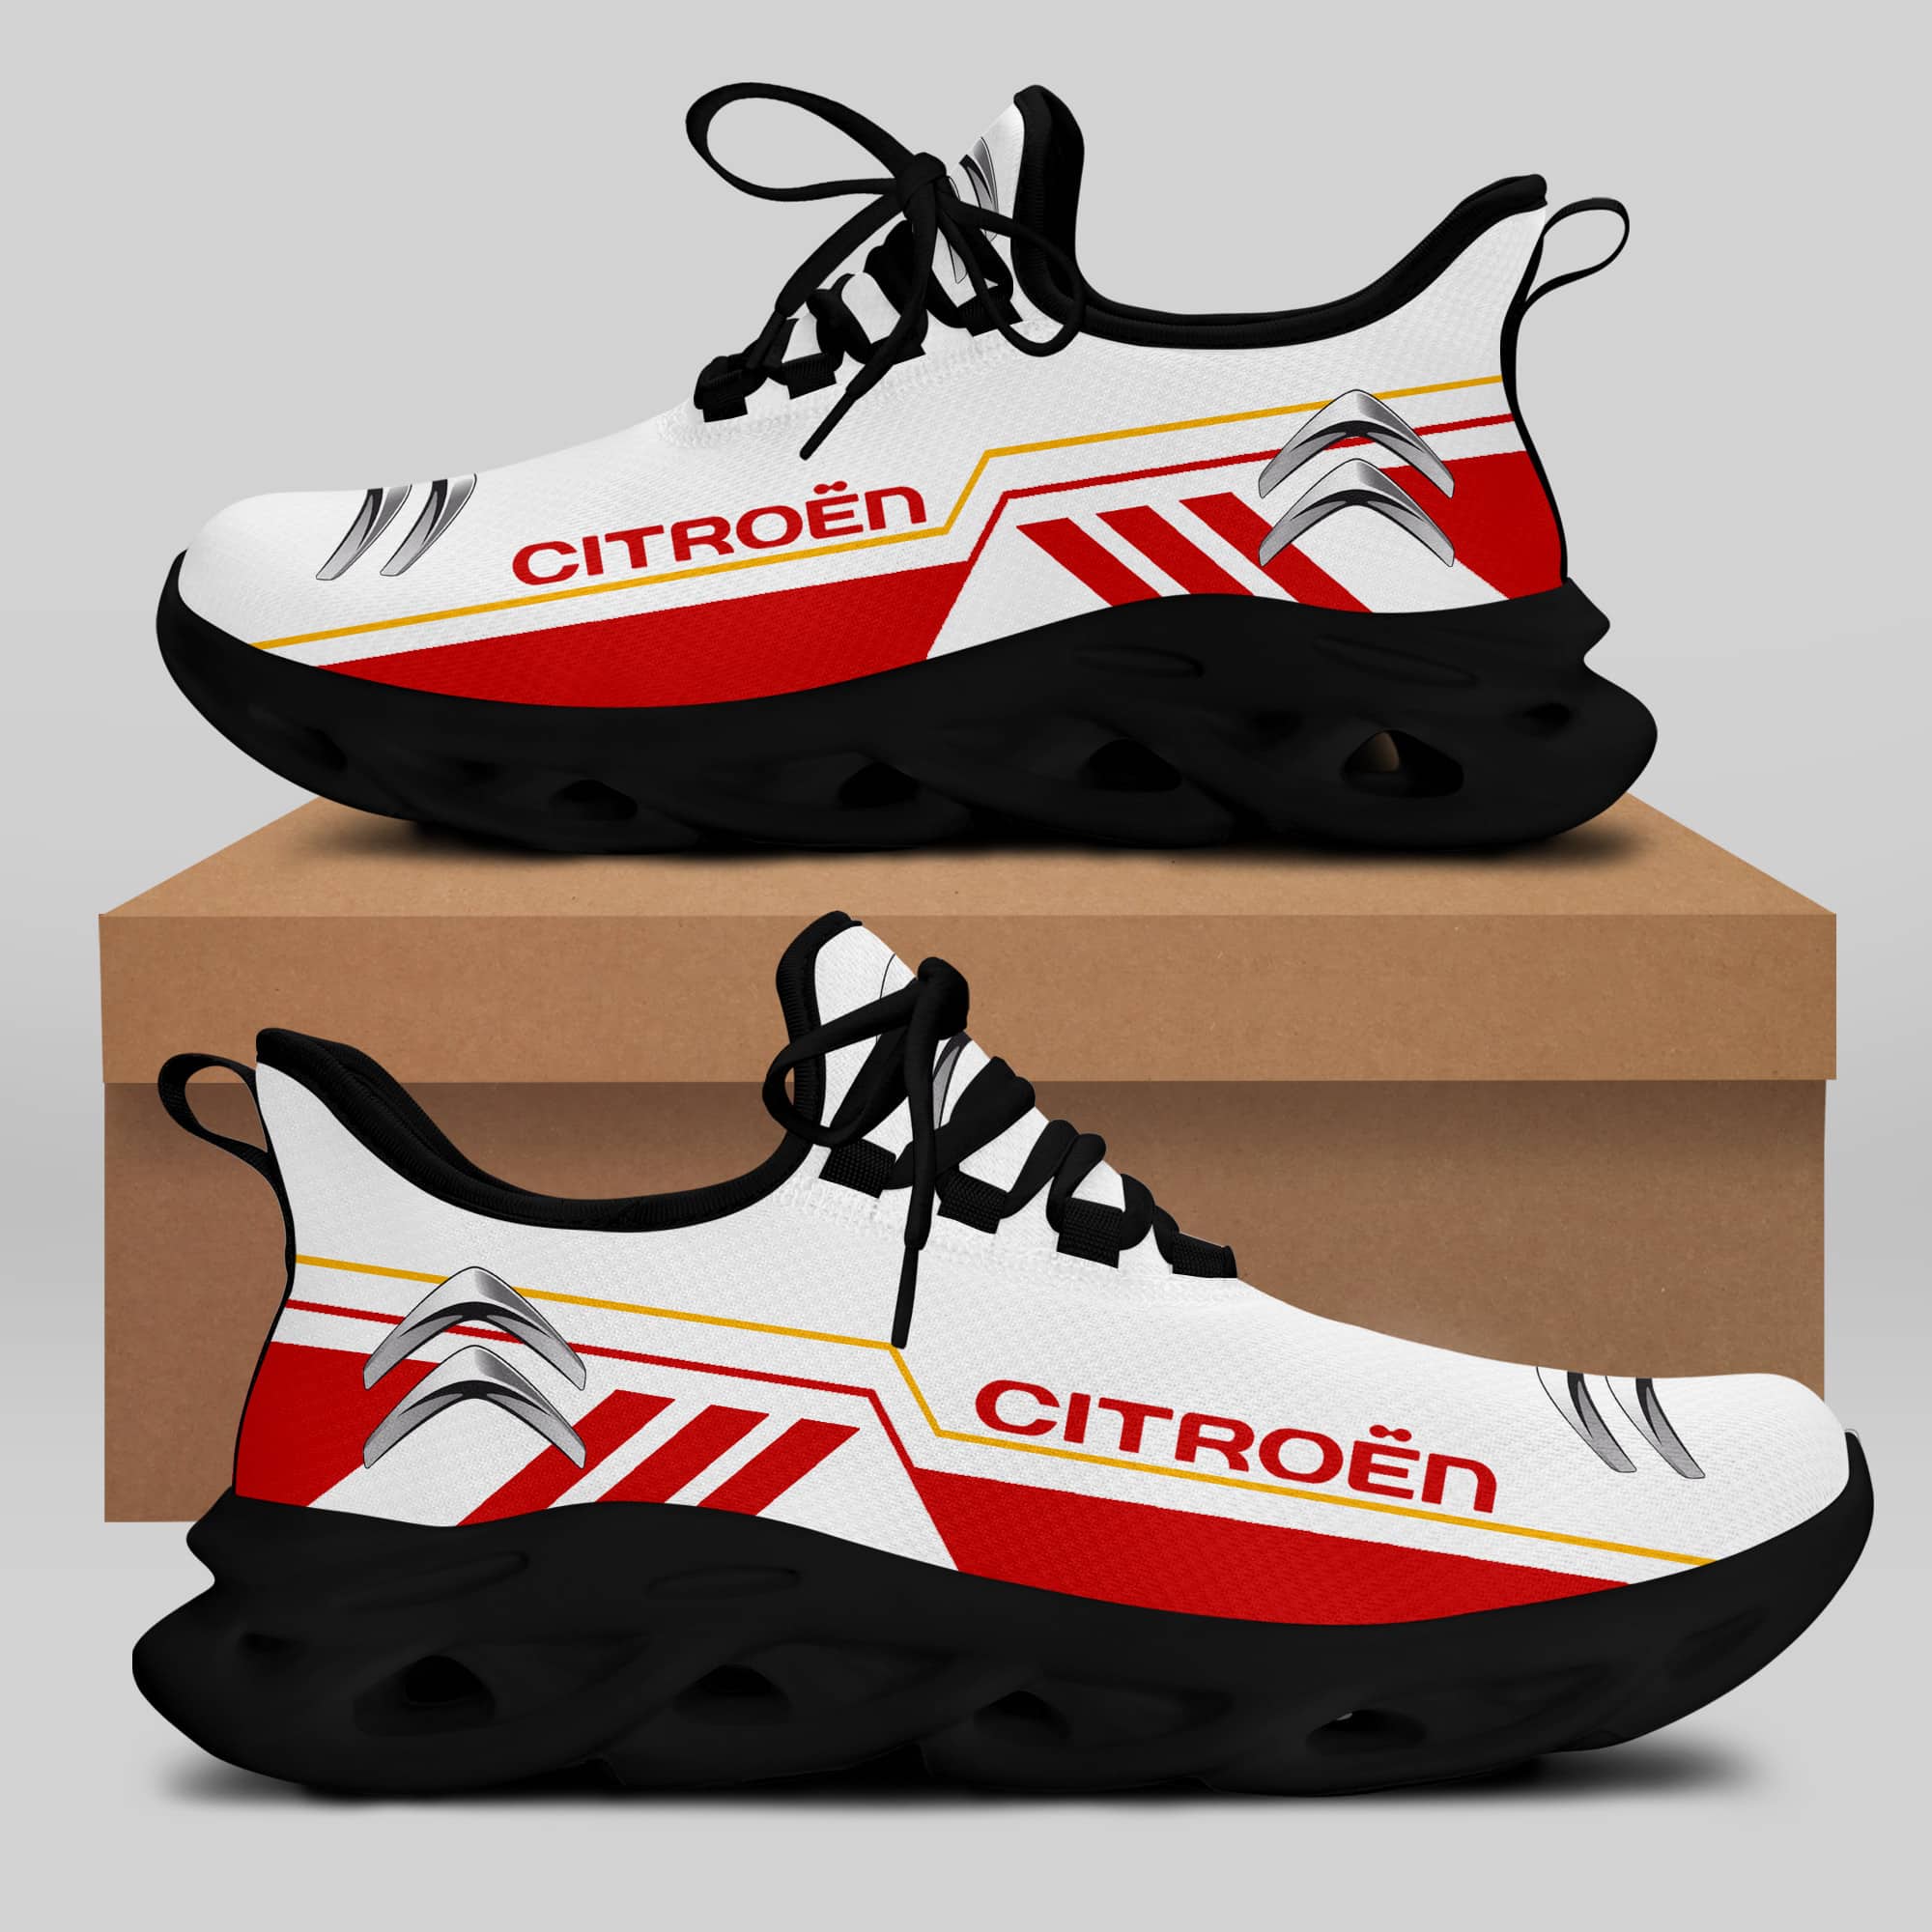 Citroën Running Shoes Max Soul Shoes Sneakers Ver 23 2